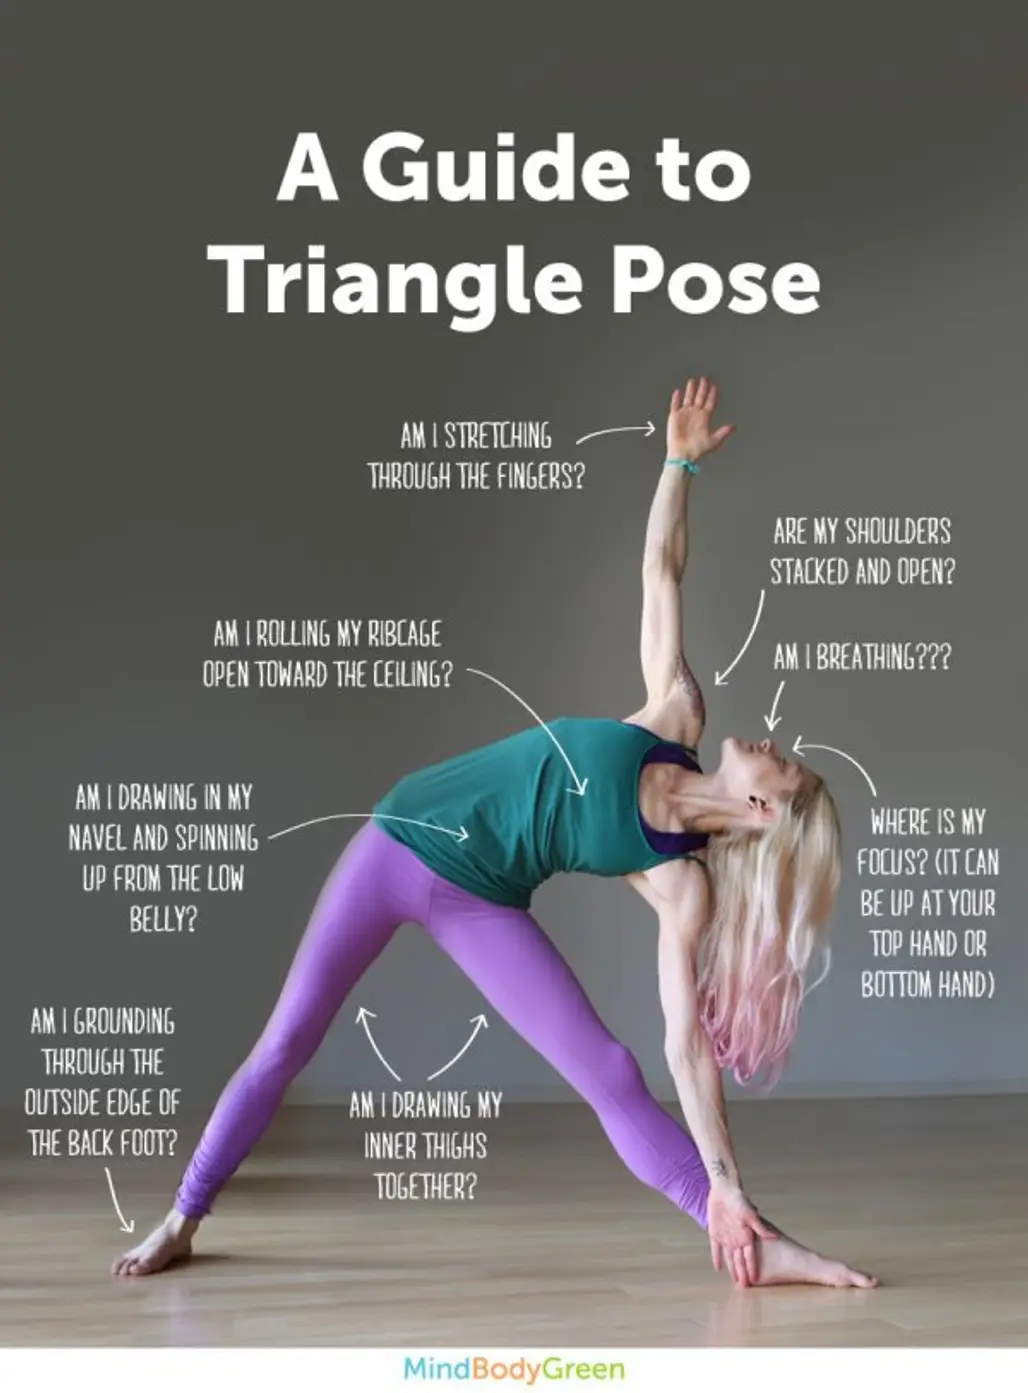 7 Yoga Poses to Strengthen and Tone Your Core - Yoga Rove